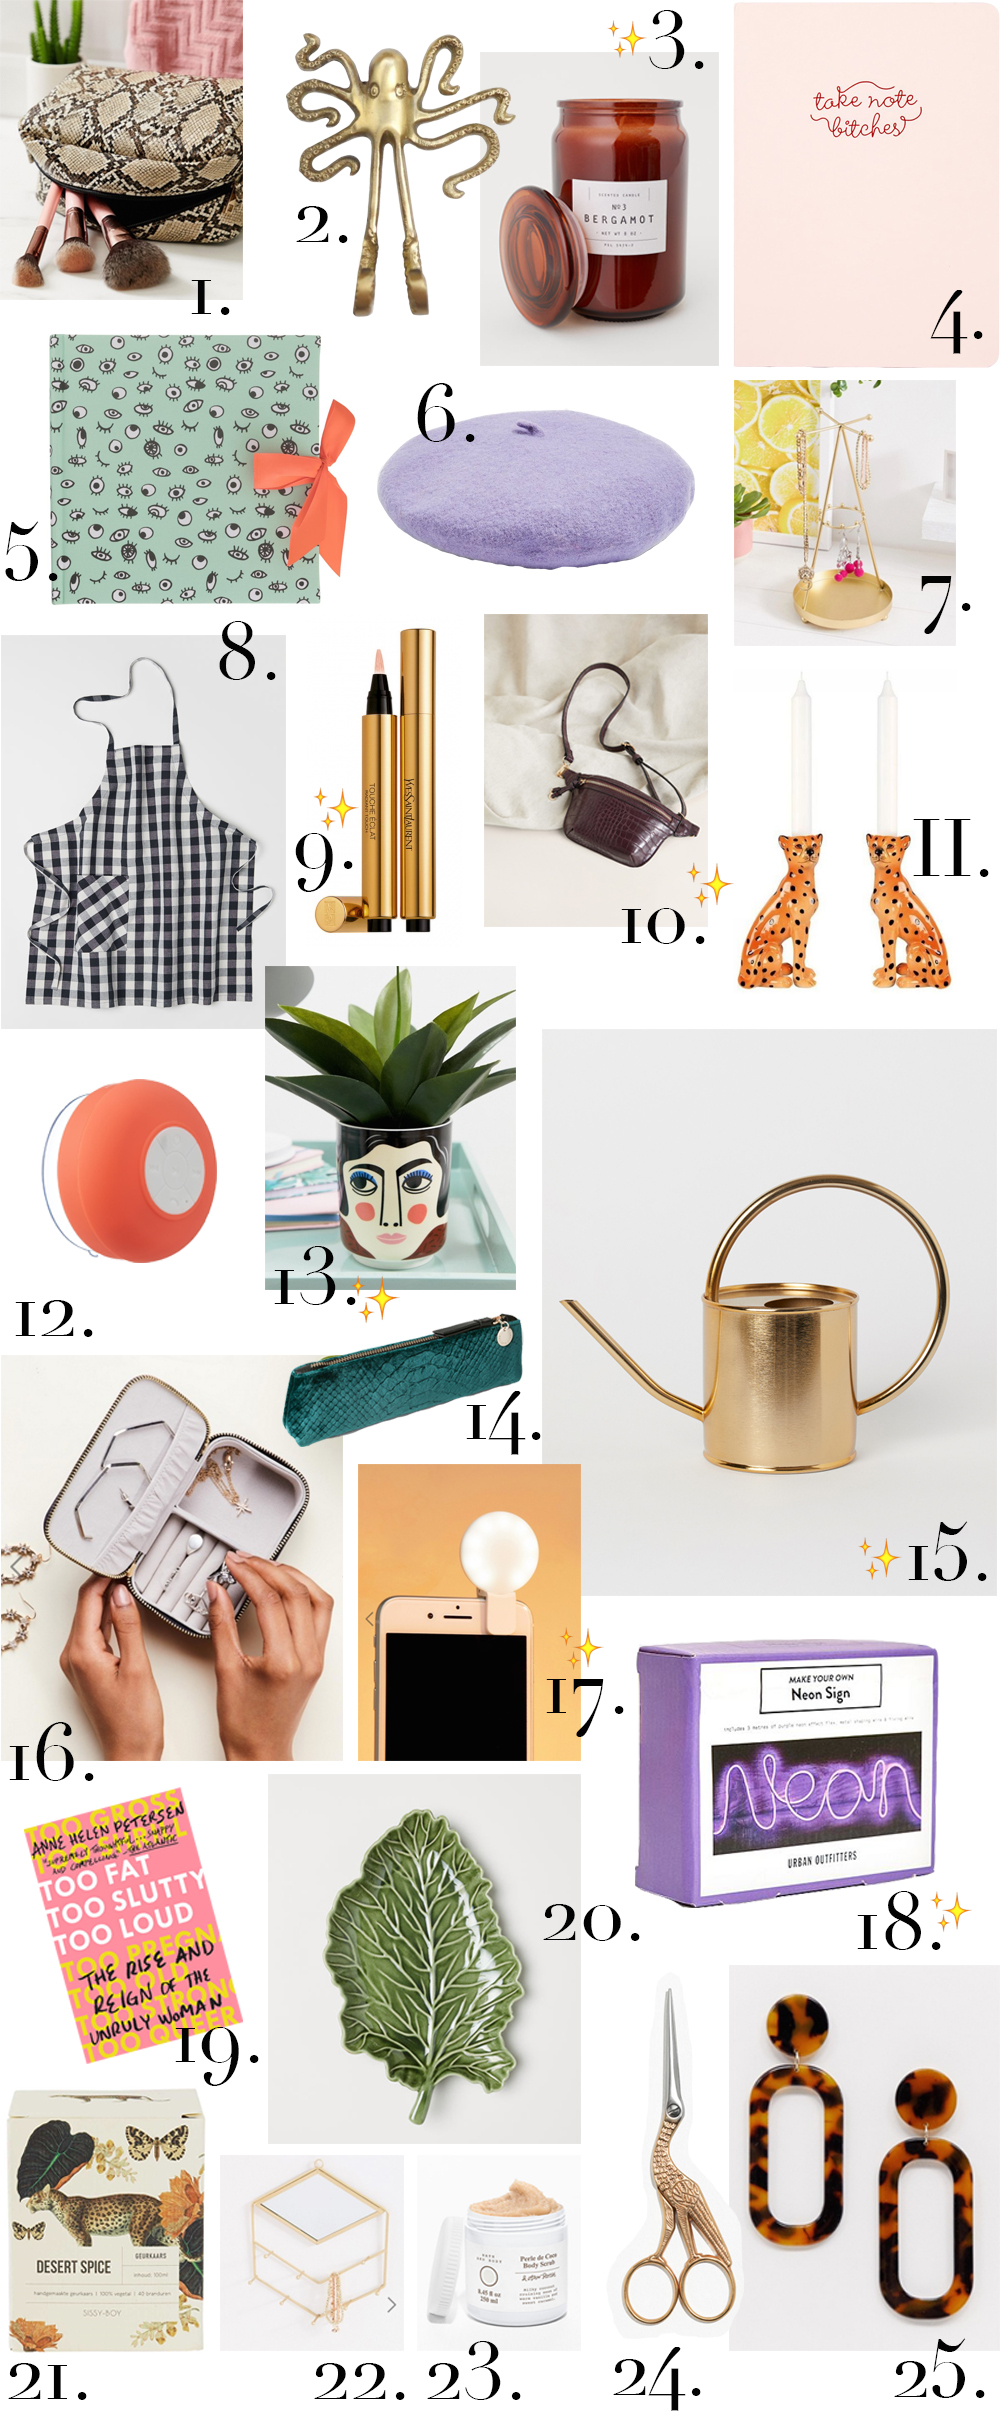 A gift guide for awesome presents under €20 - polienne